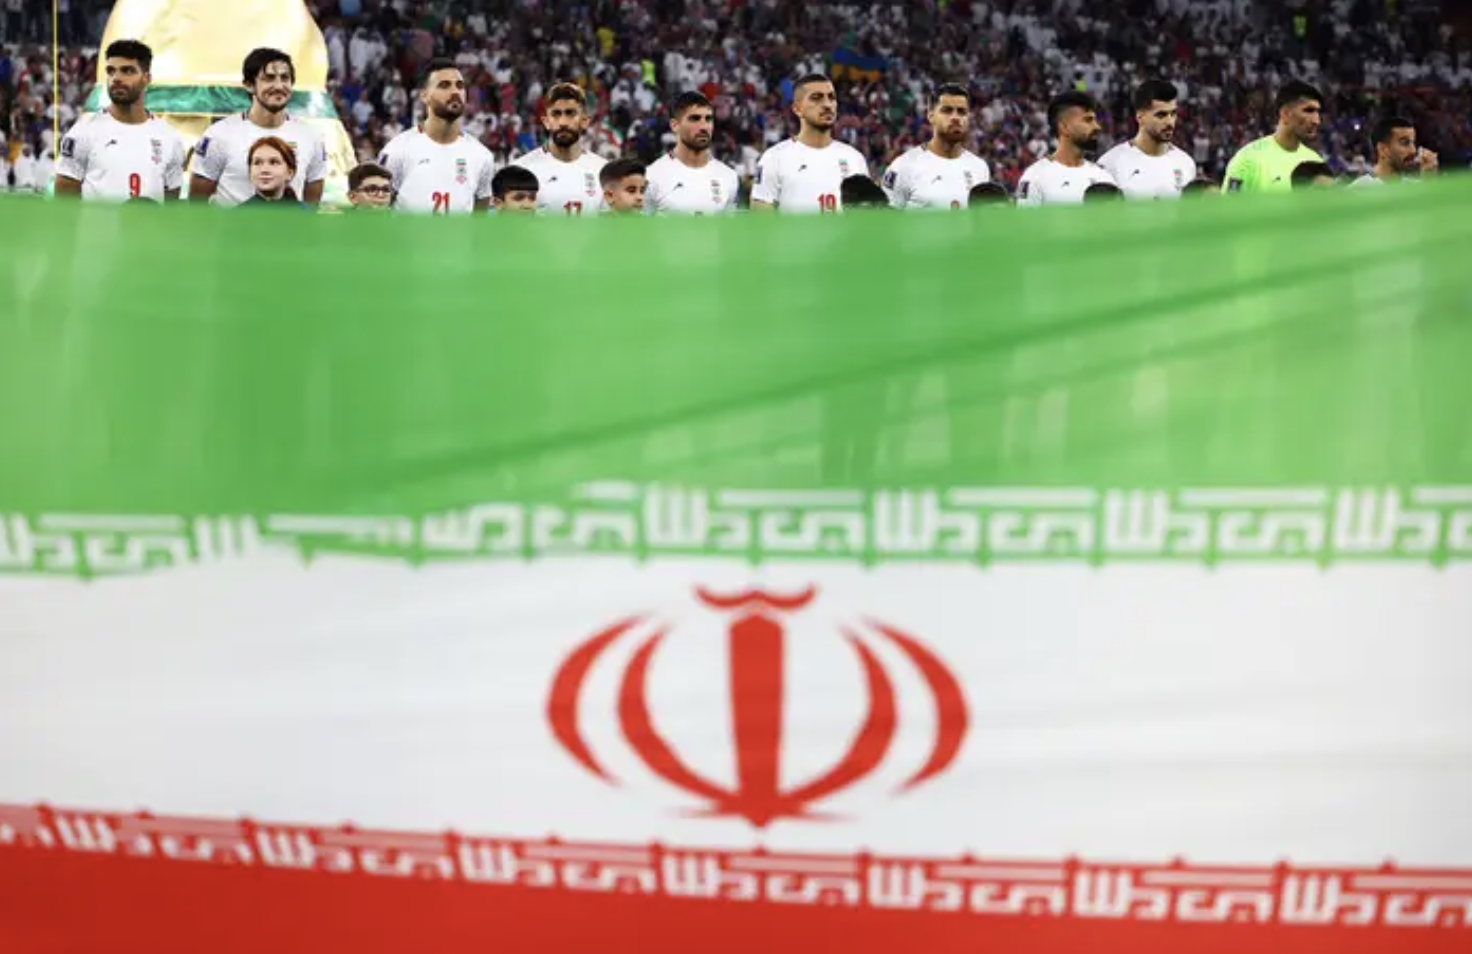 A huge Iranian flag; in the background is a row of Iranian soccer players